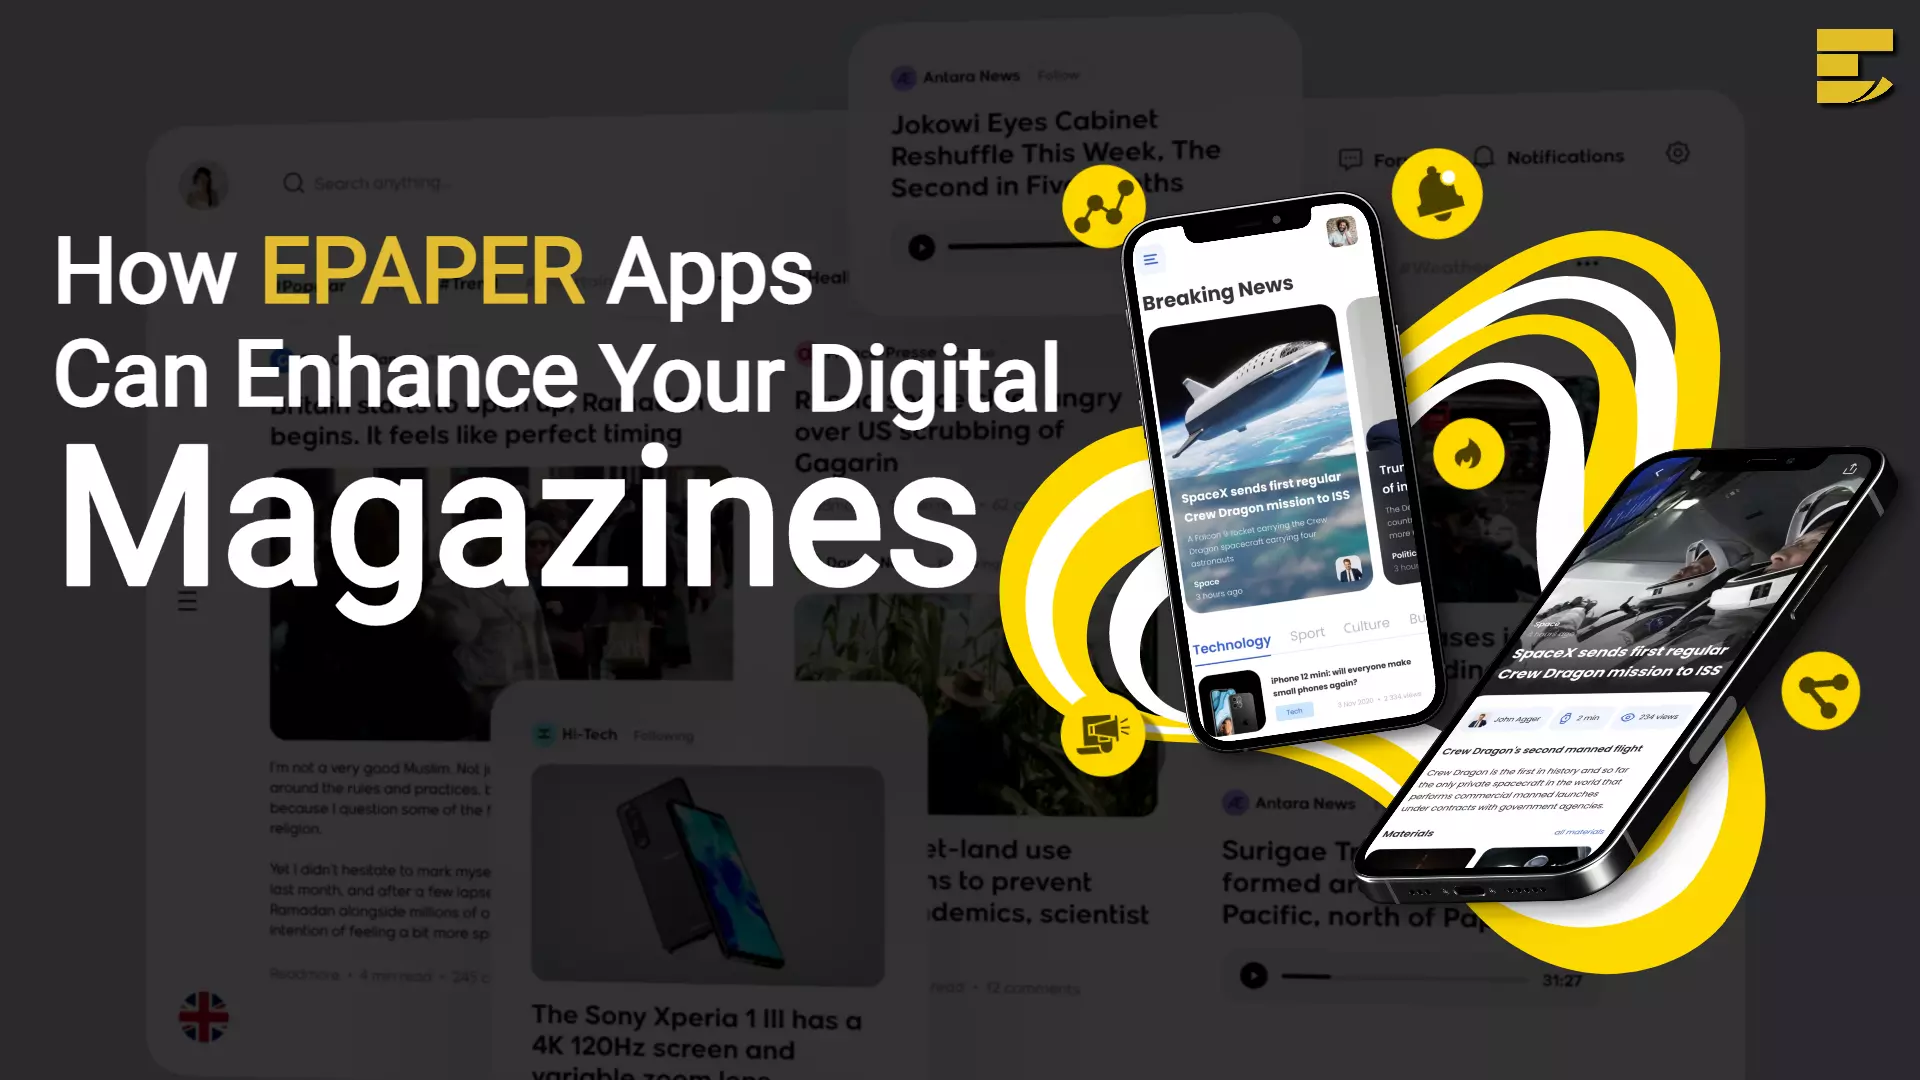 4 best tips: how epaper apps can enhance your digital magazines